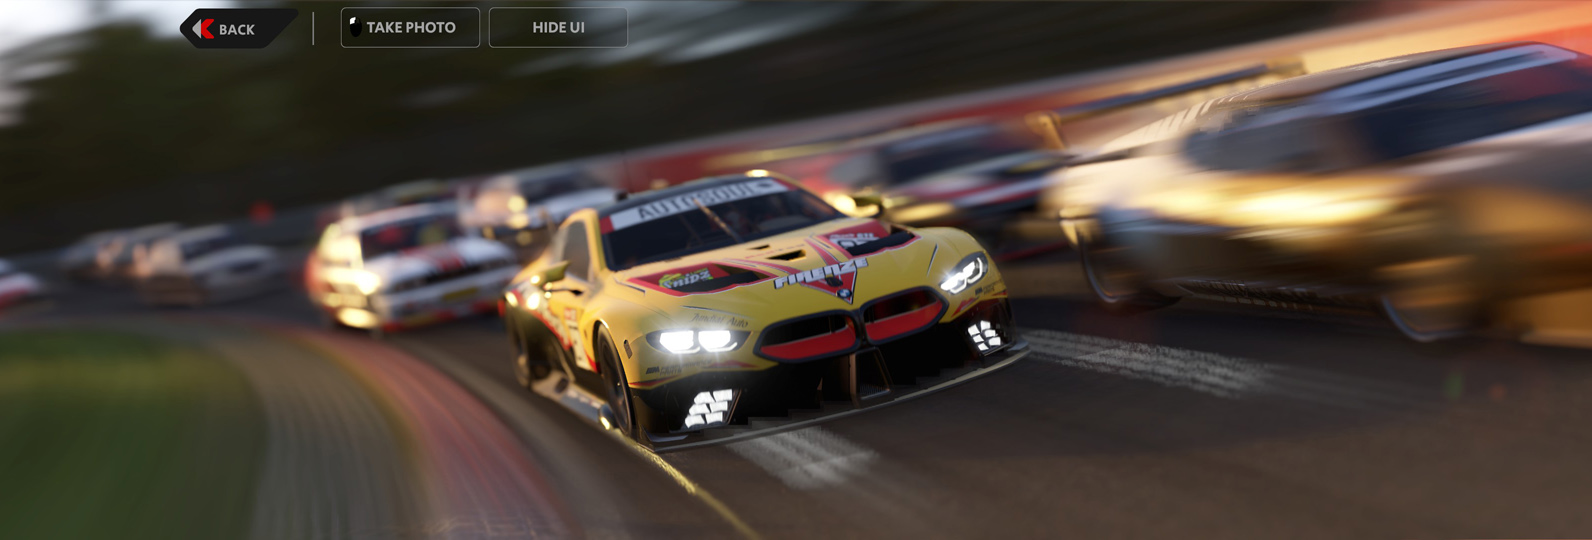 2 AMS2 PHOTO MODE BMW GTE on NORDS x5 replay Speed crop copy.jpg